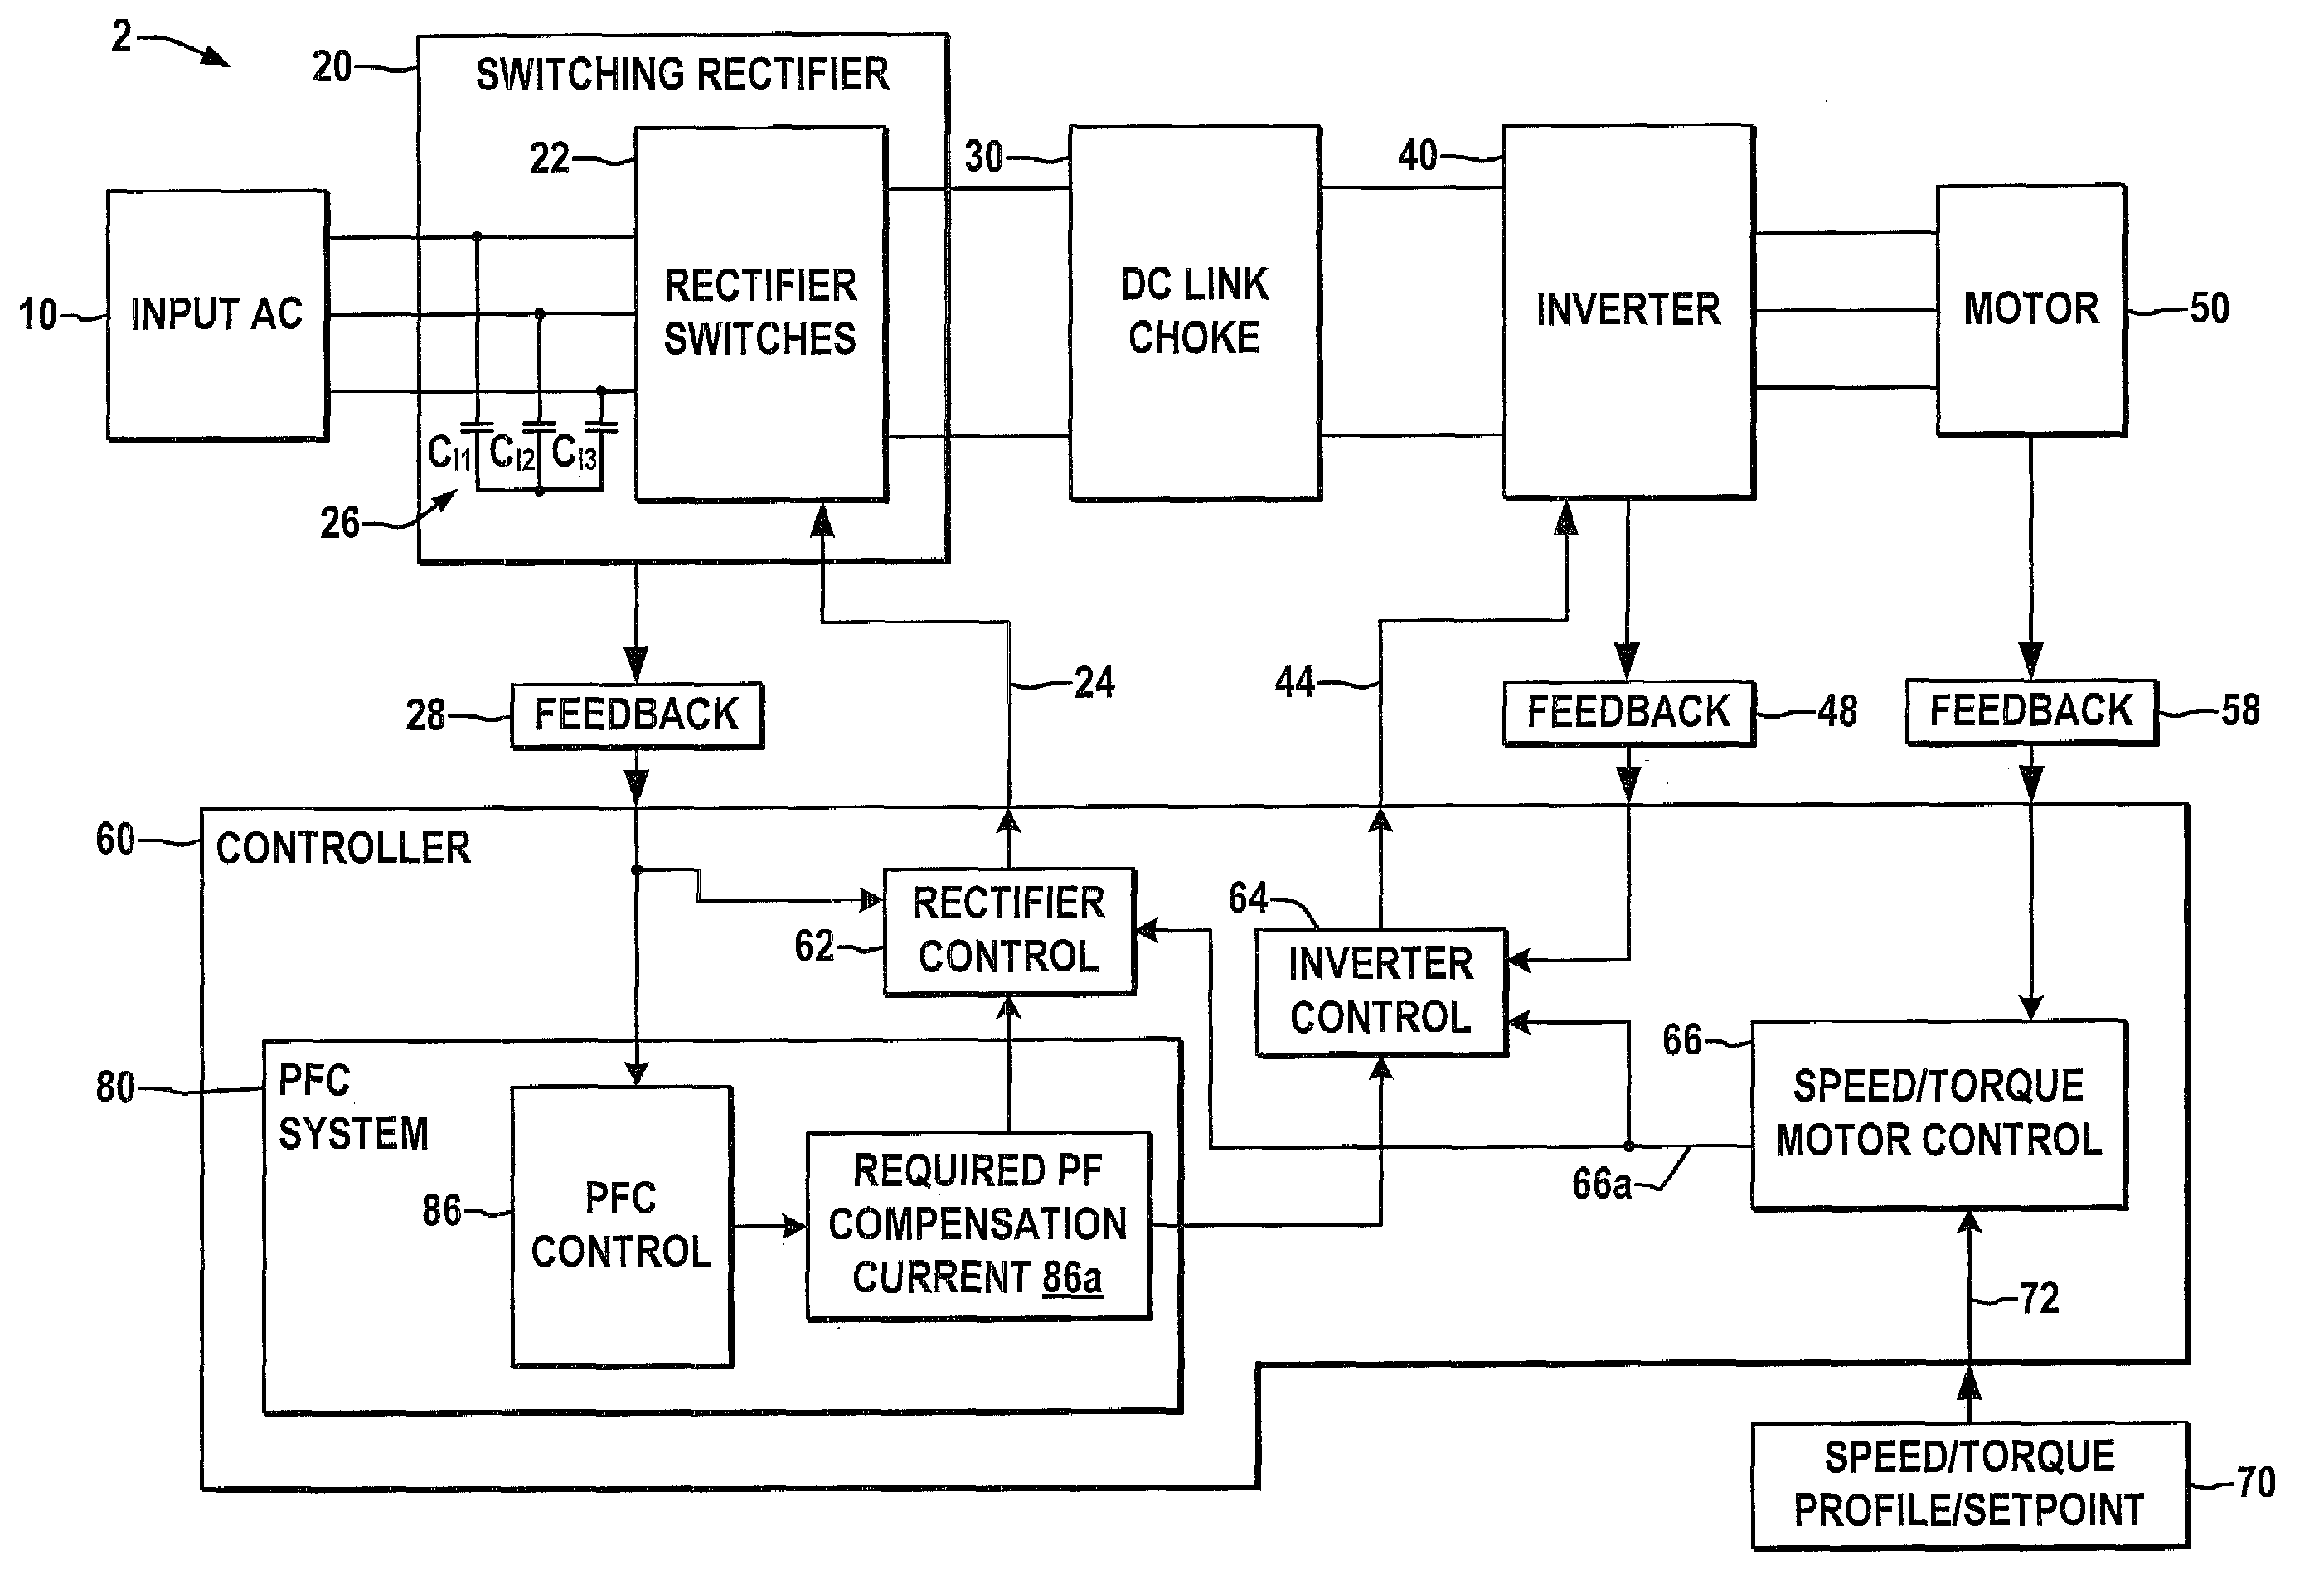 Systems and methods for improved motor drive power factor control